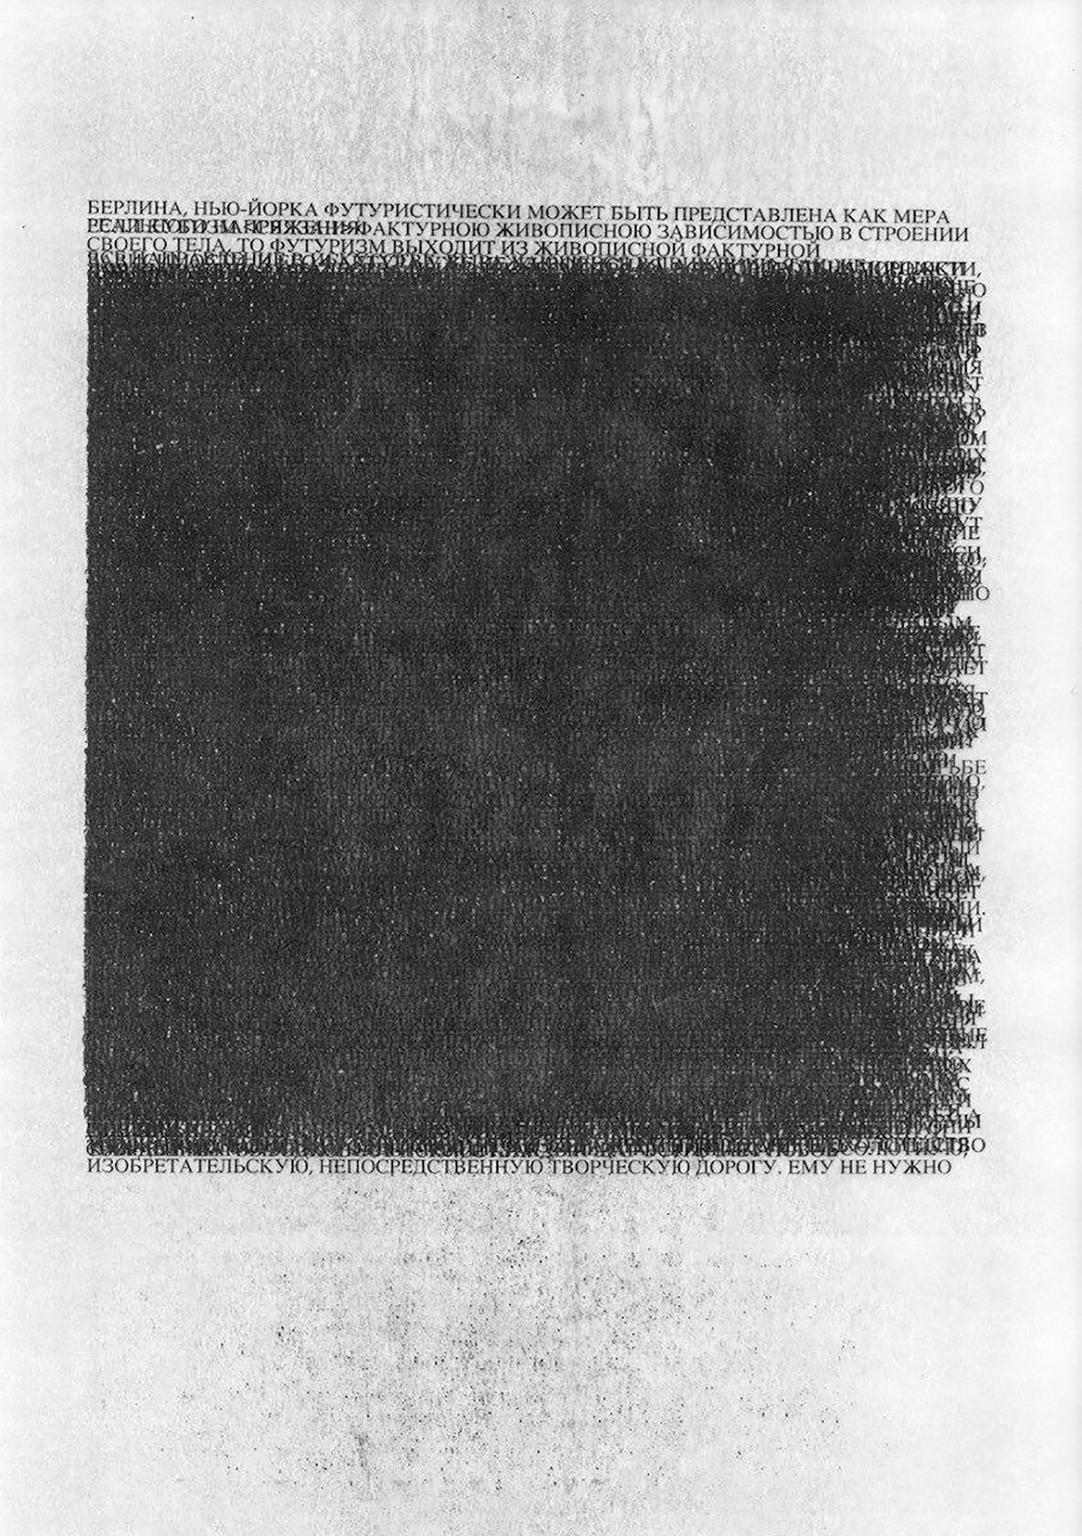 Black Square - Contemporary Black and White Digital Print - Text - Malevich  - Mixed Media Art by Alexey Mandych